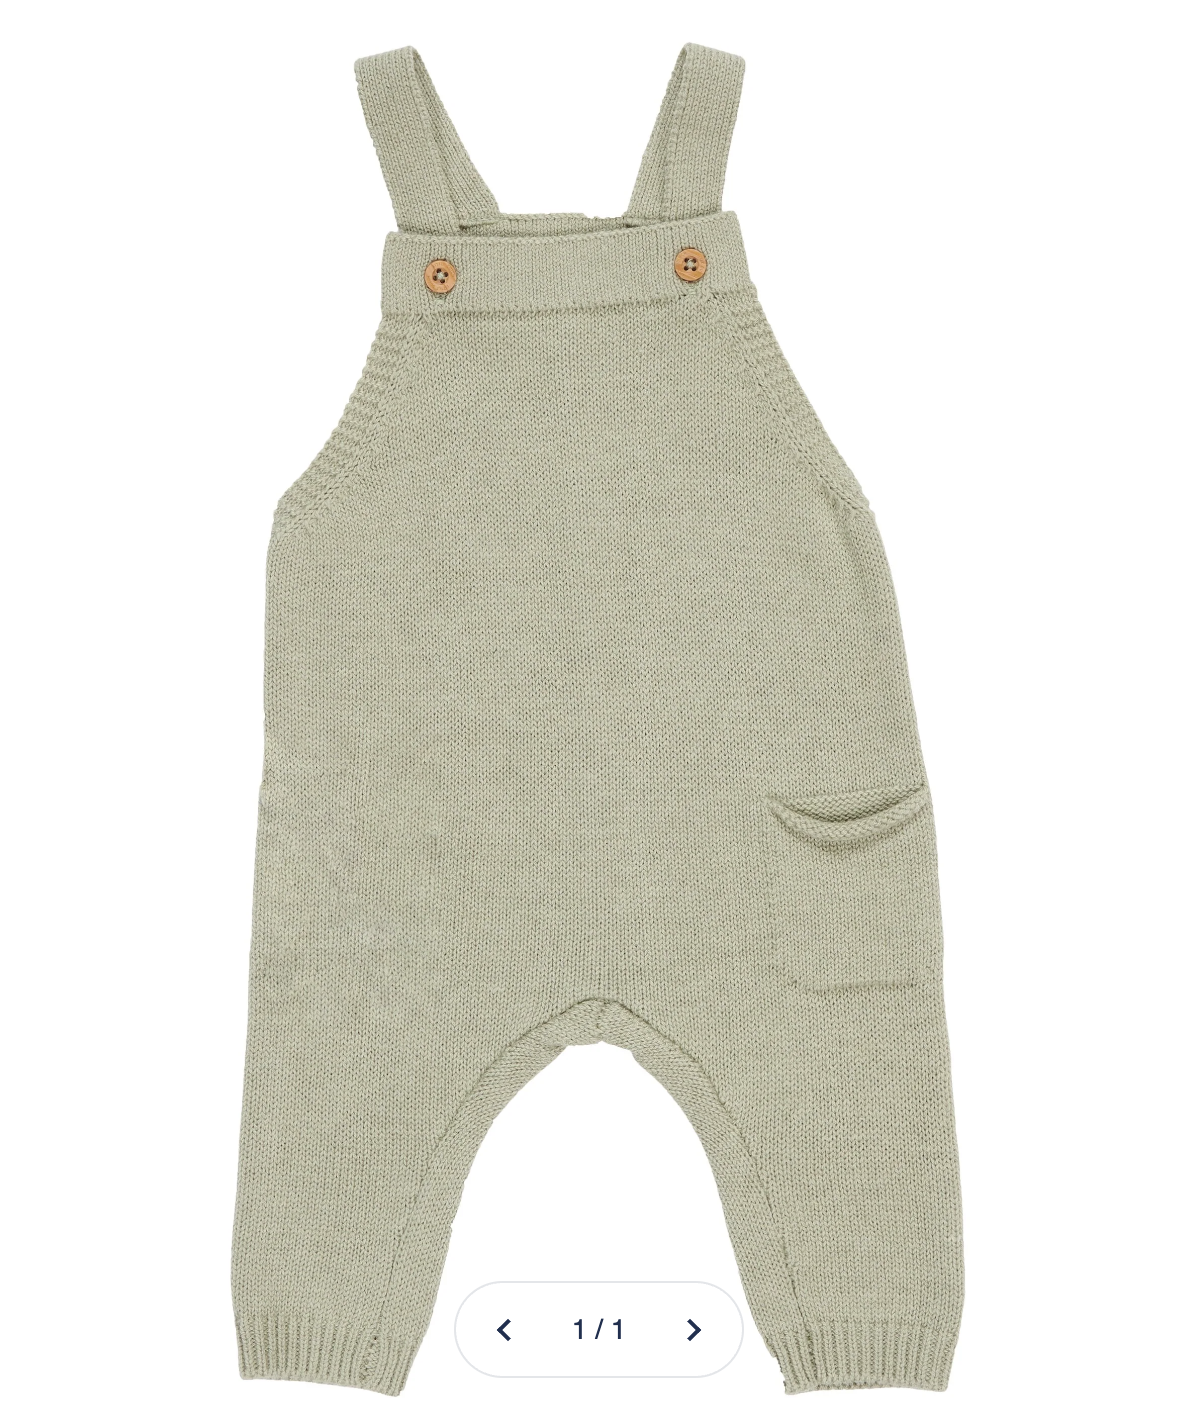 Little Dutch Knitted Dungarees Outfit